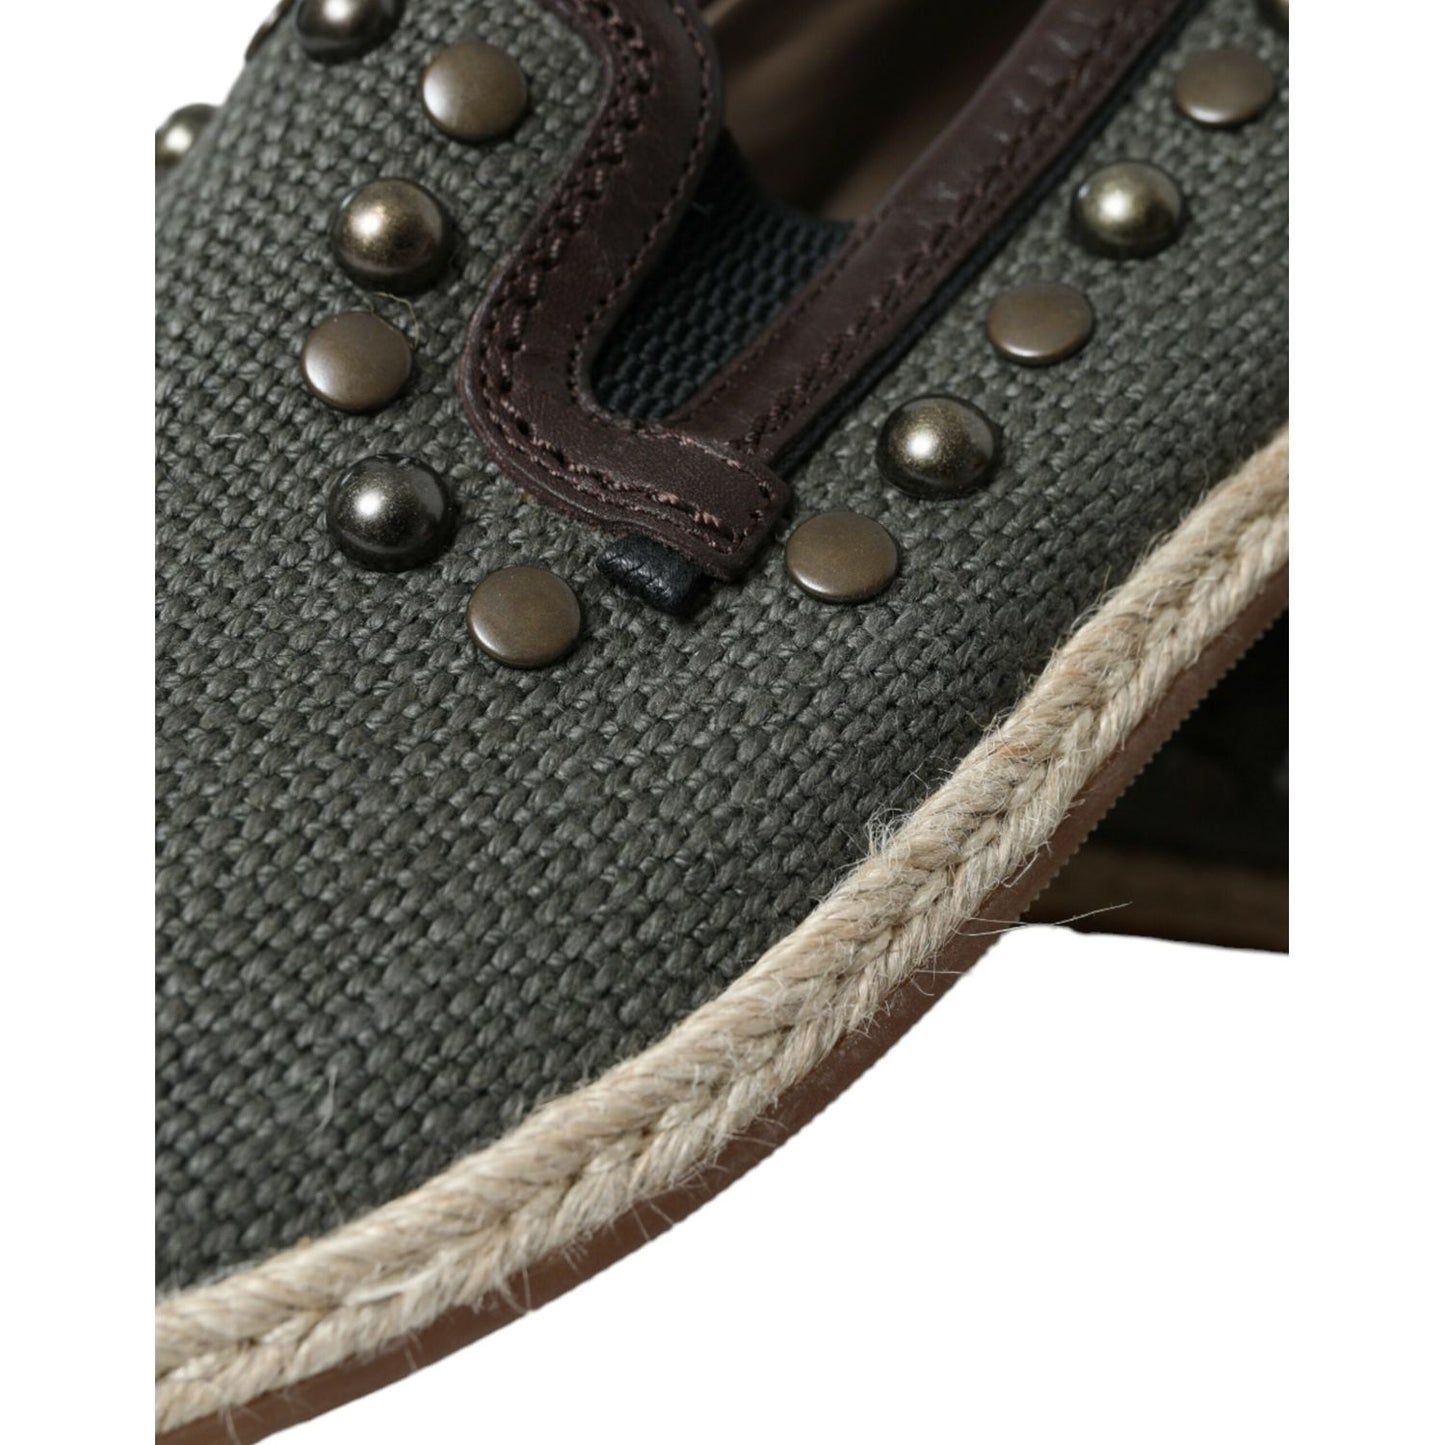 Dolce & Gabbana Studded Canvas Loafer Slipper Shoes gray-linen-leather-studded-loafers-shoes